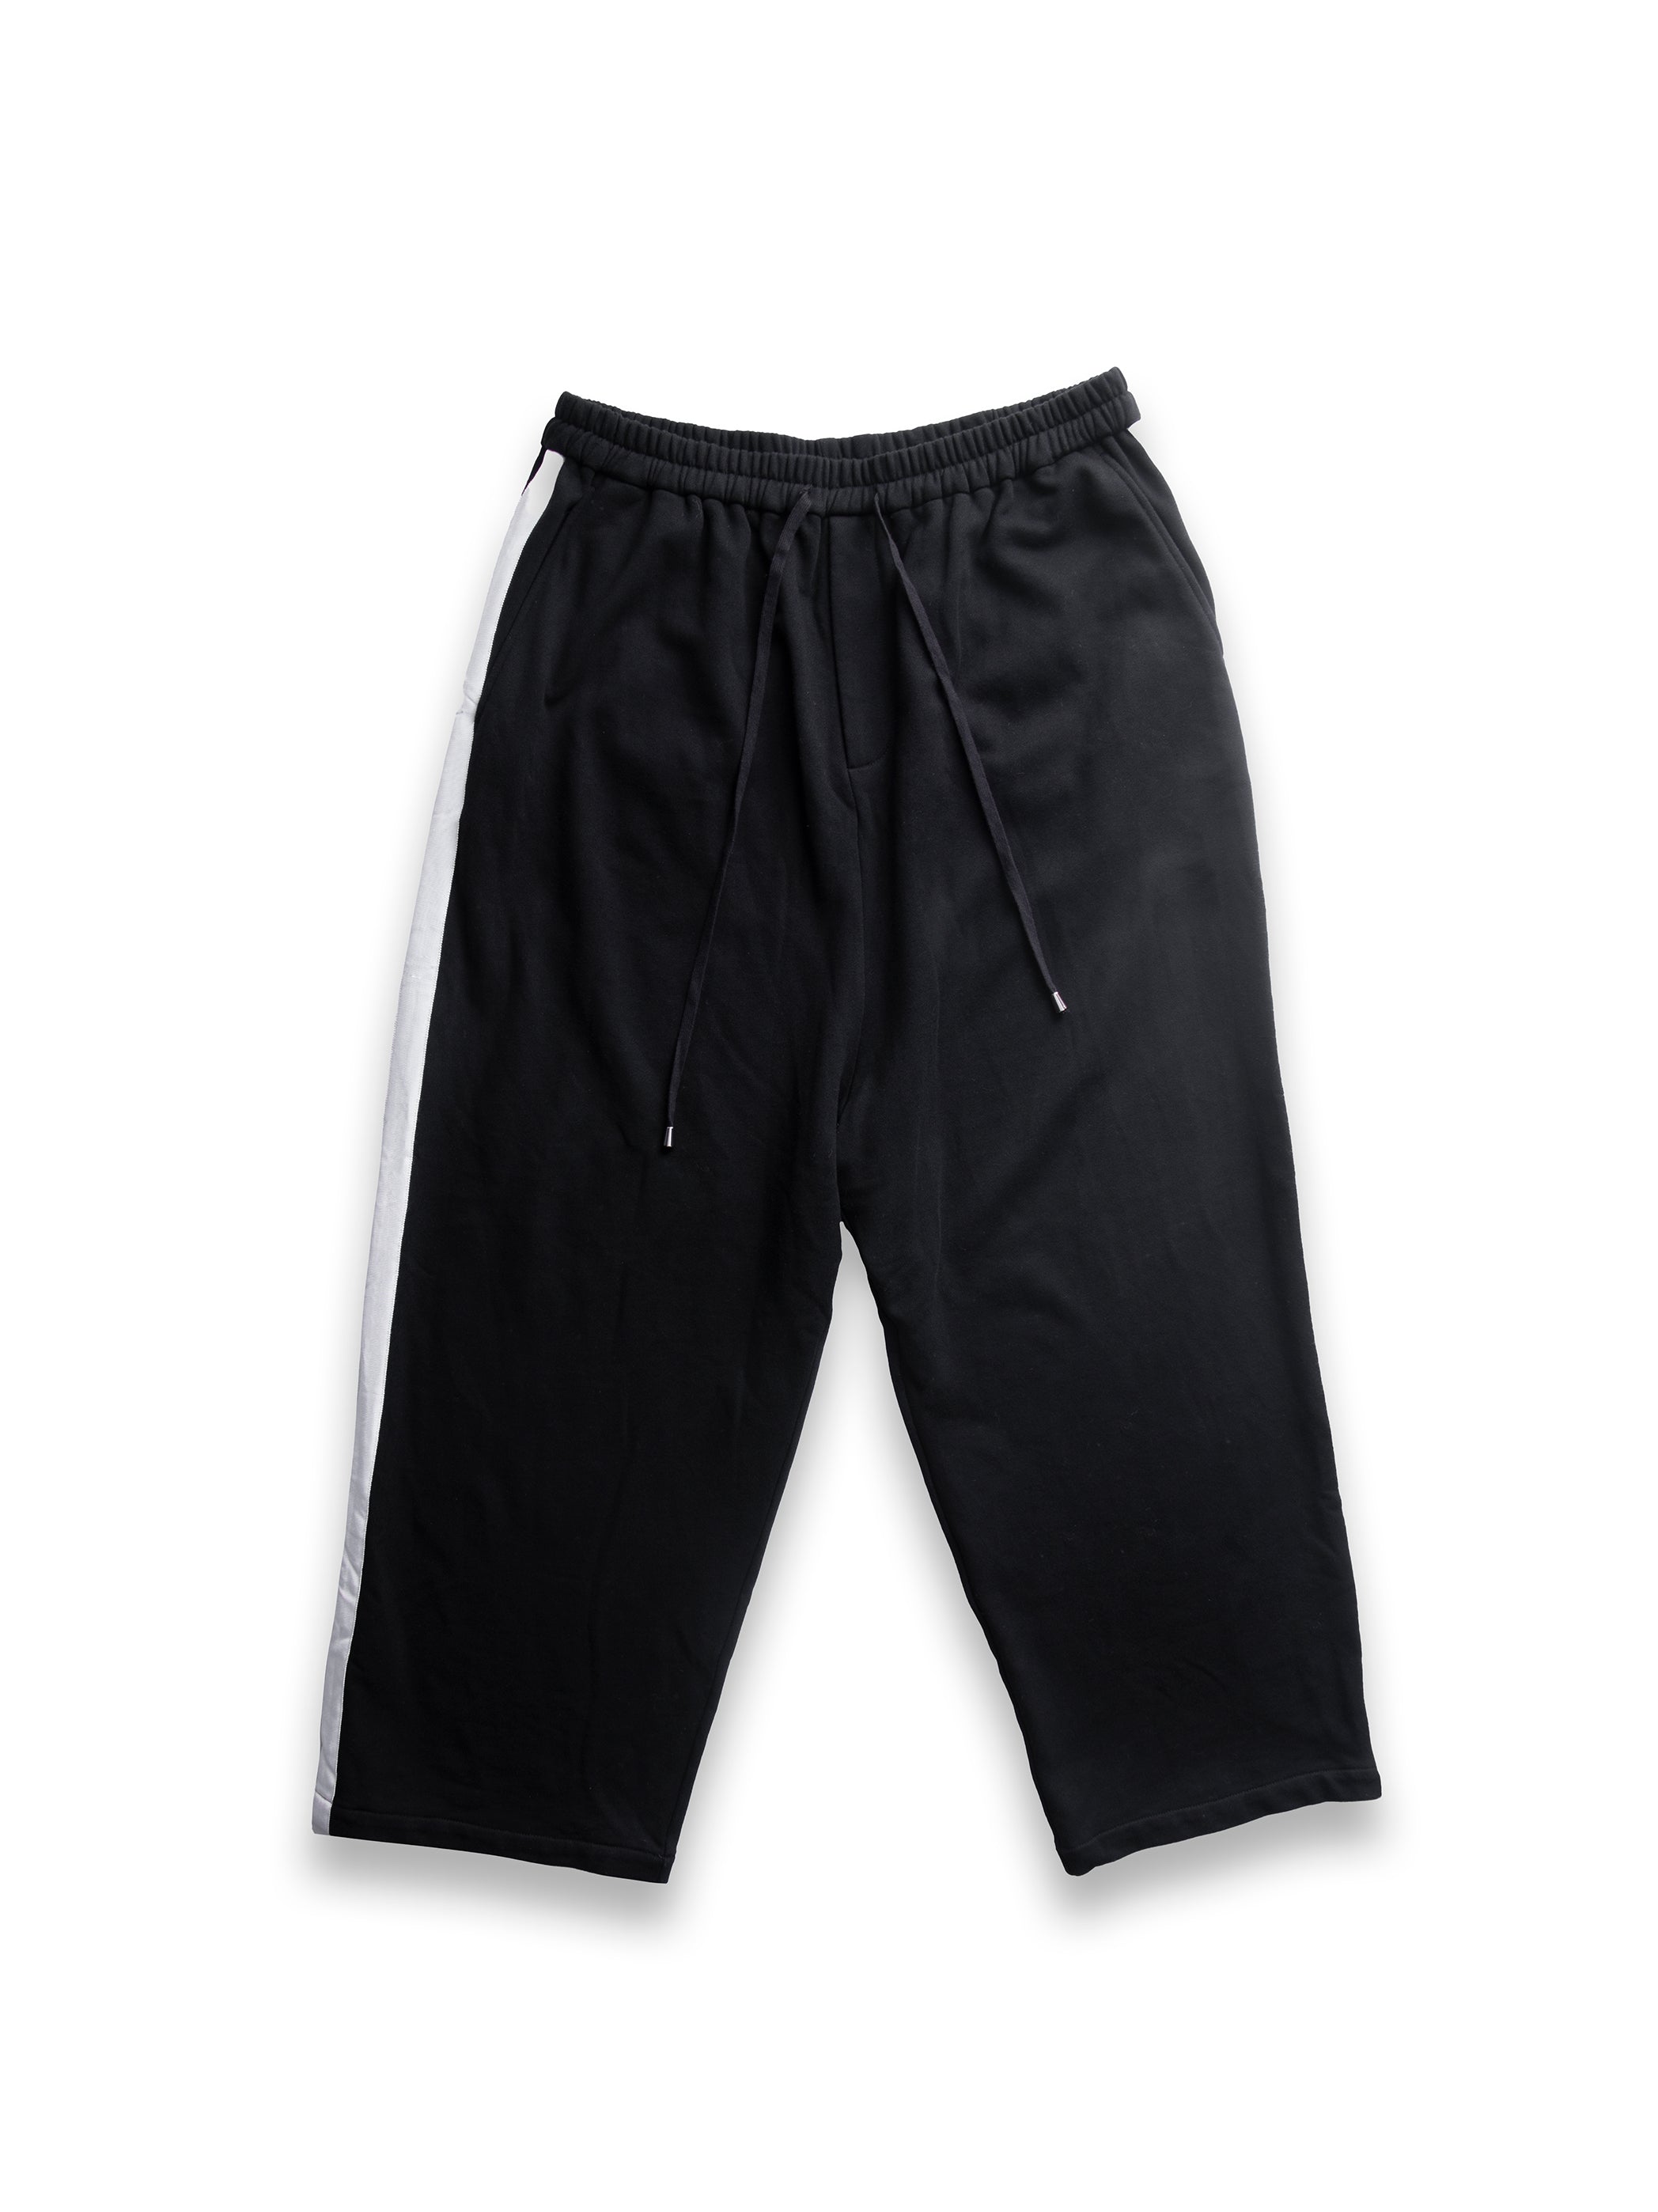 Black Jogger Trousers with White Side Stripe